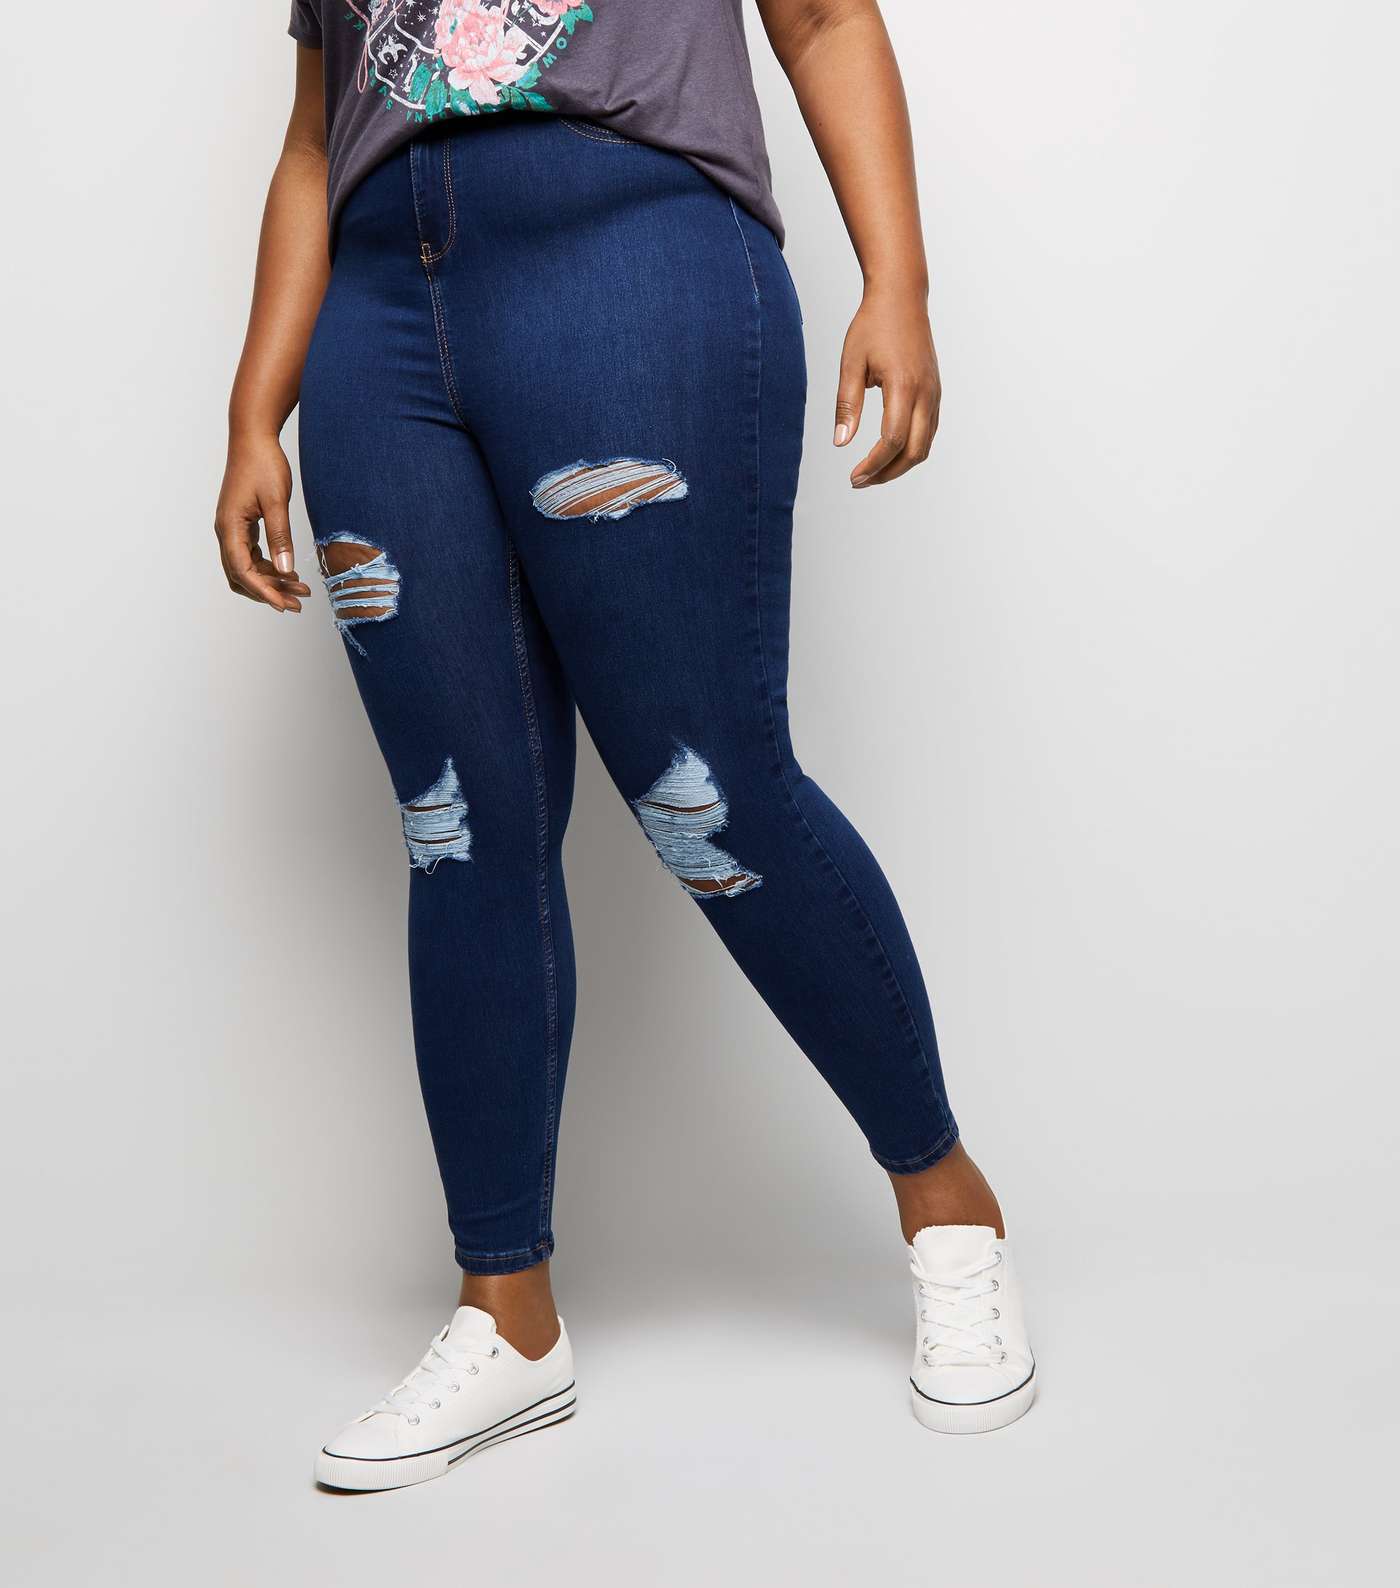 Curves Blue Ripped High Waist Super Skinny Jeans Image 2